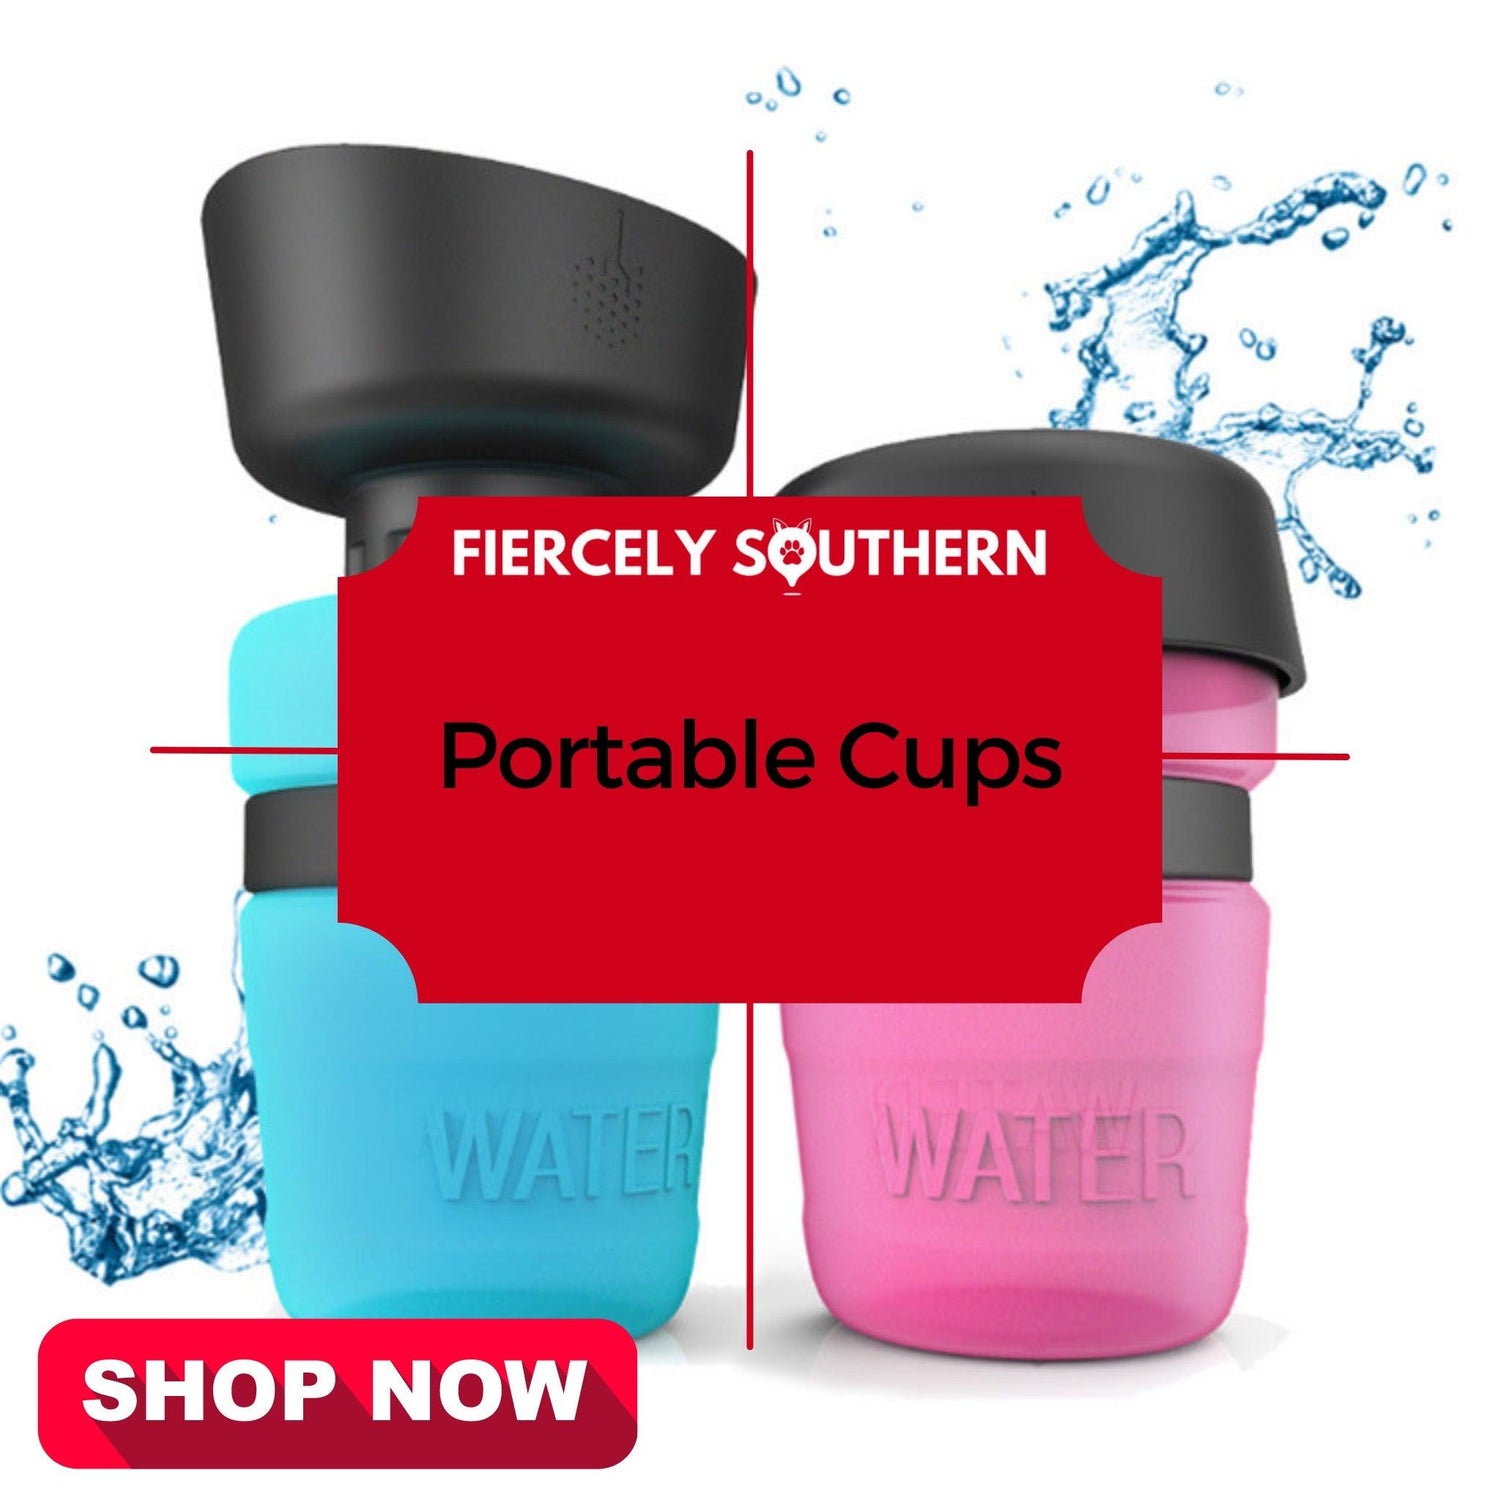 Portable Cups - Fiercely Southern